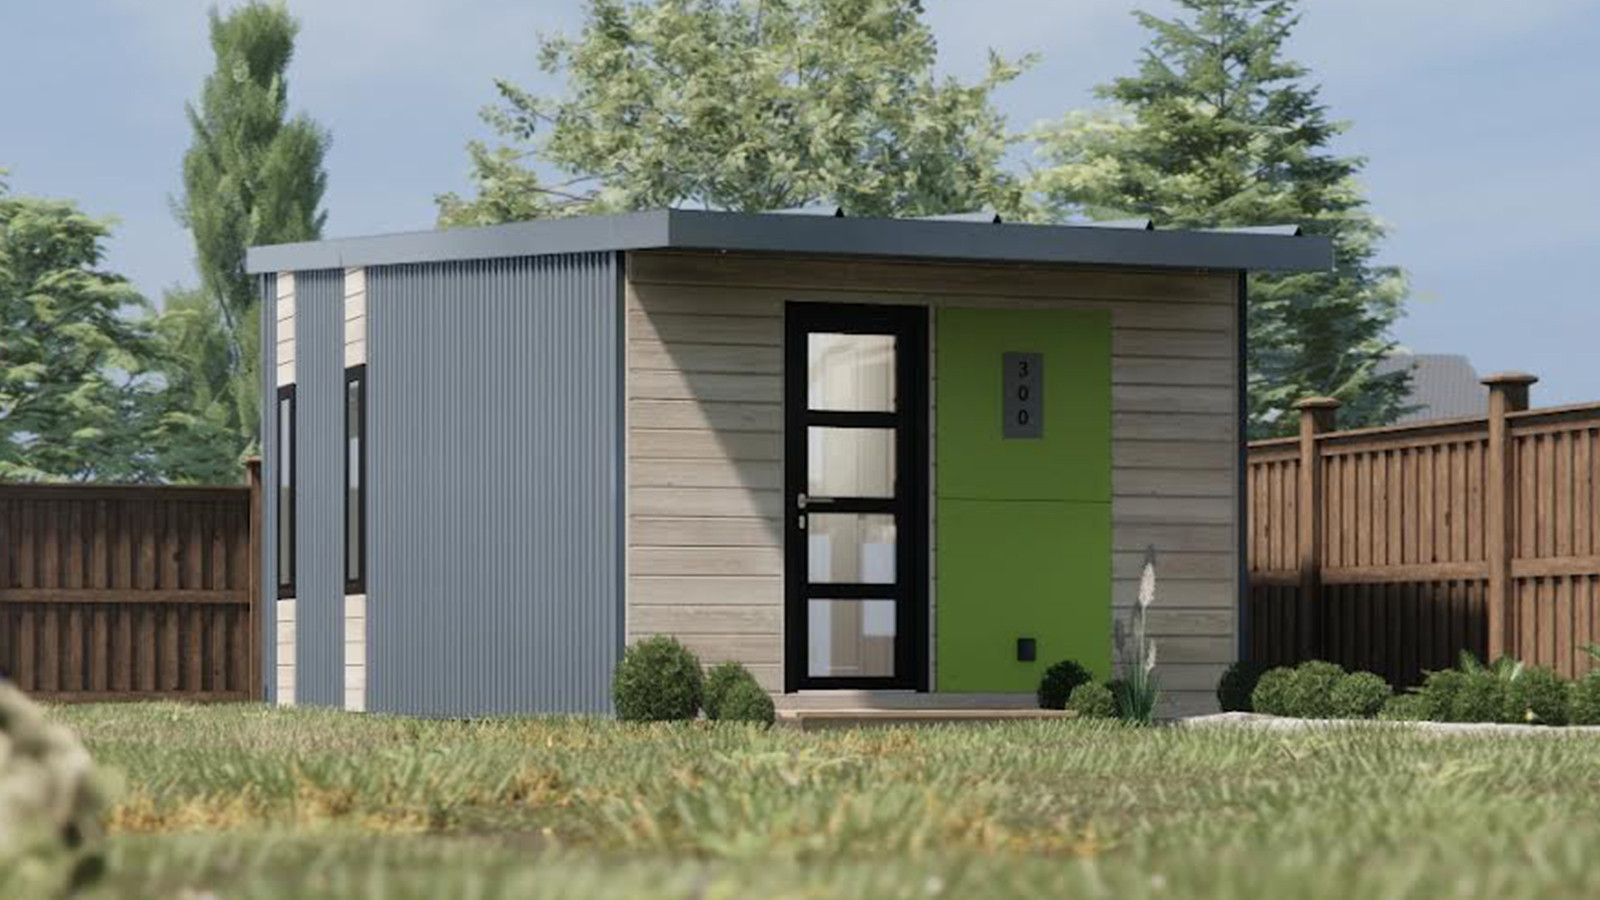 Add-on suites and tiny homes could be part of the solution to St. Catharines’ housing crisis